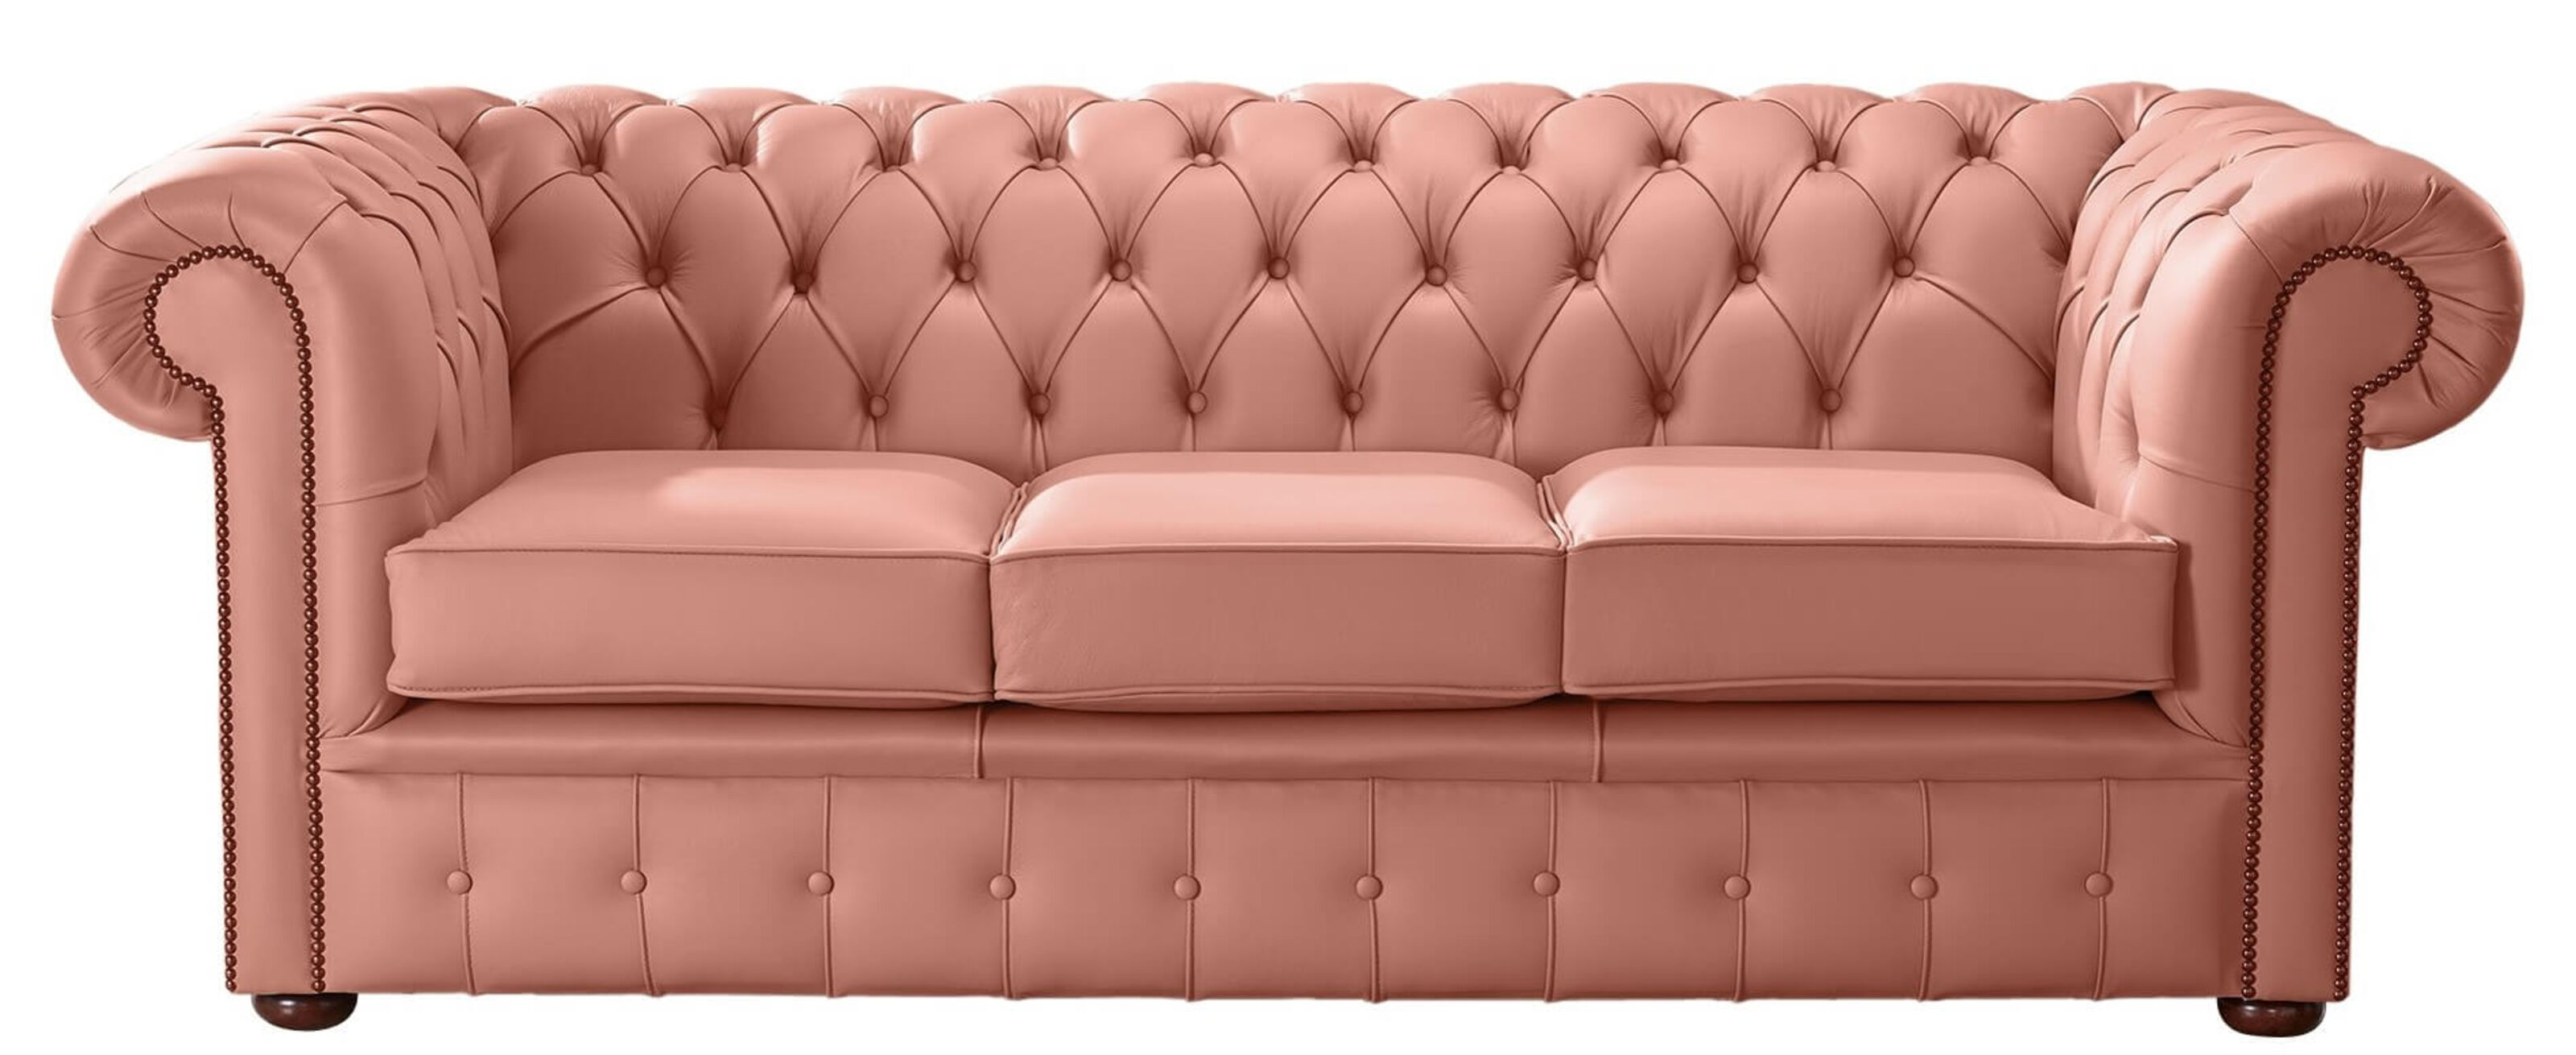 Timeless Charm Chesterfield Sofa Collections from Ethan Allen  %Post Title